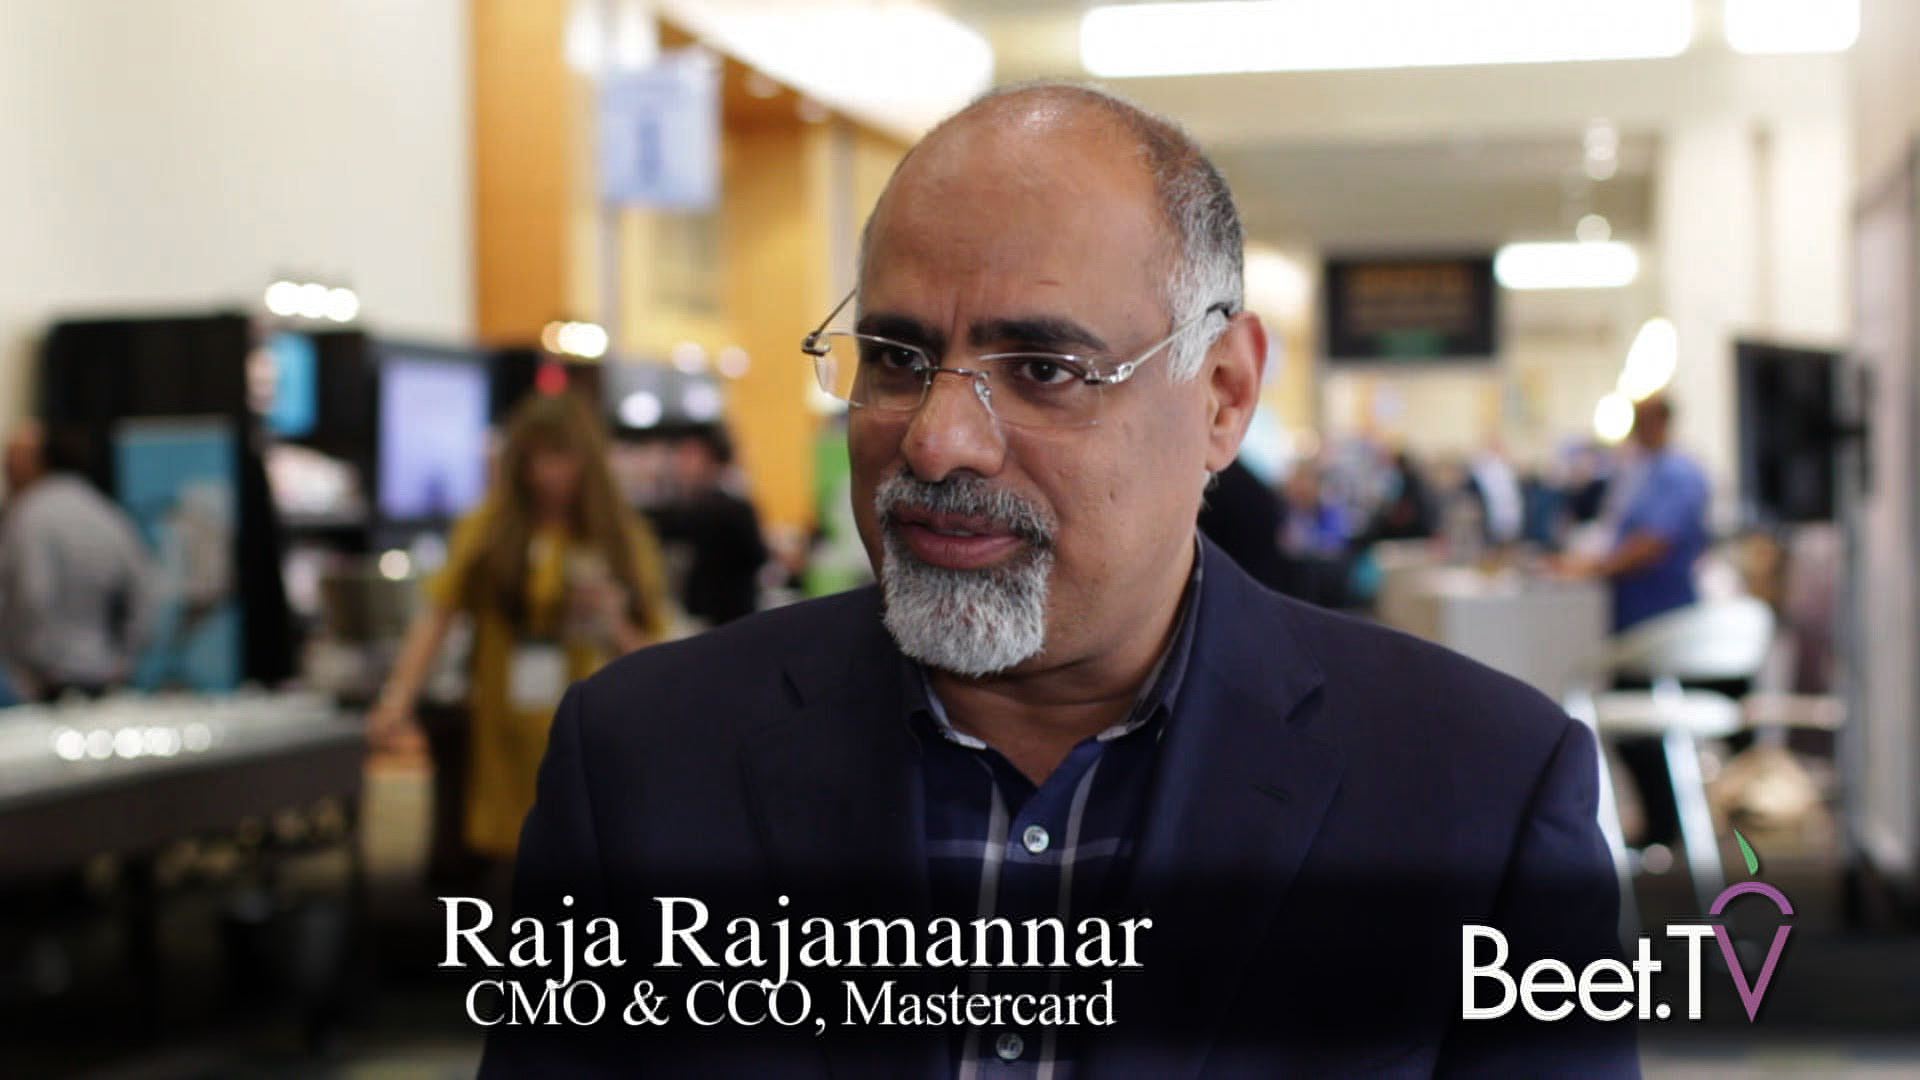 Forget Storytelling, It’s All About ‘Story Making’: Mastercard’s Raja Rajamannar